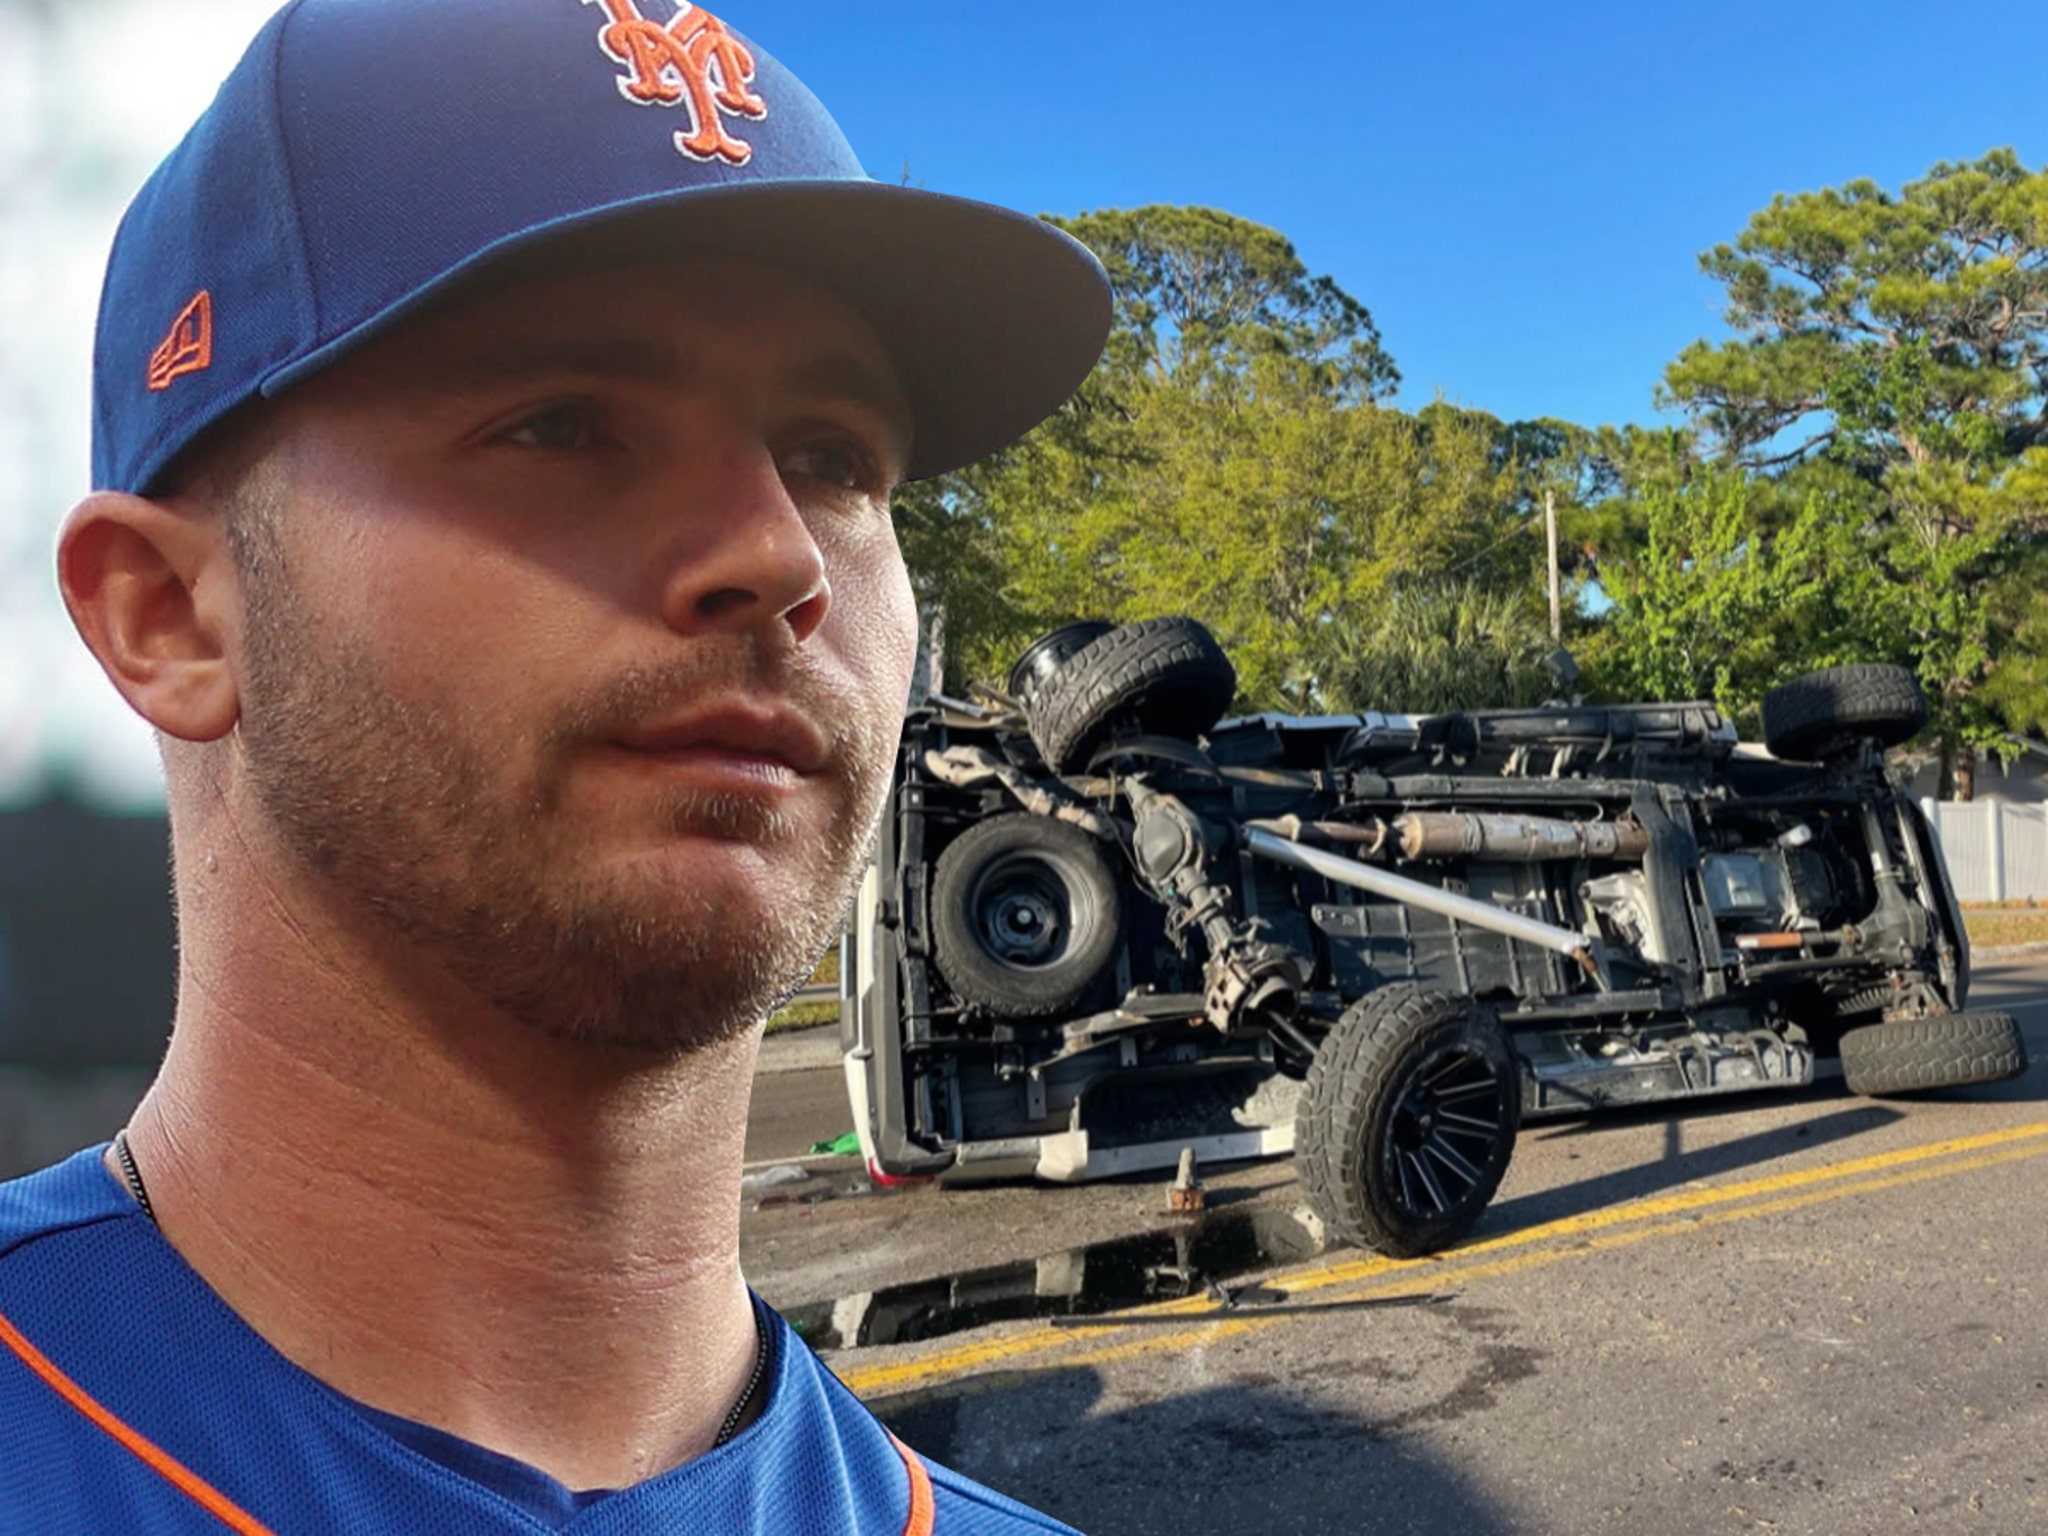 Pete Alonso details scary car accident on way to Mets spring training